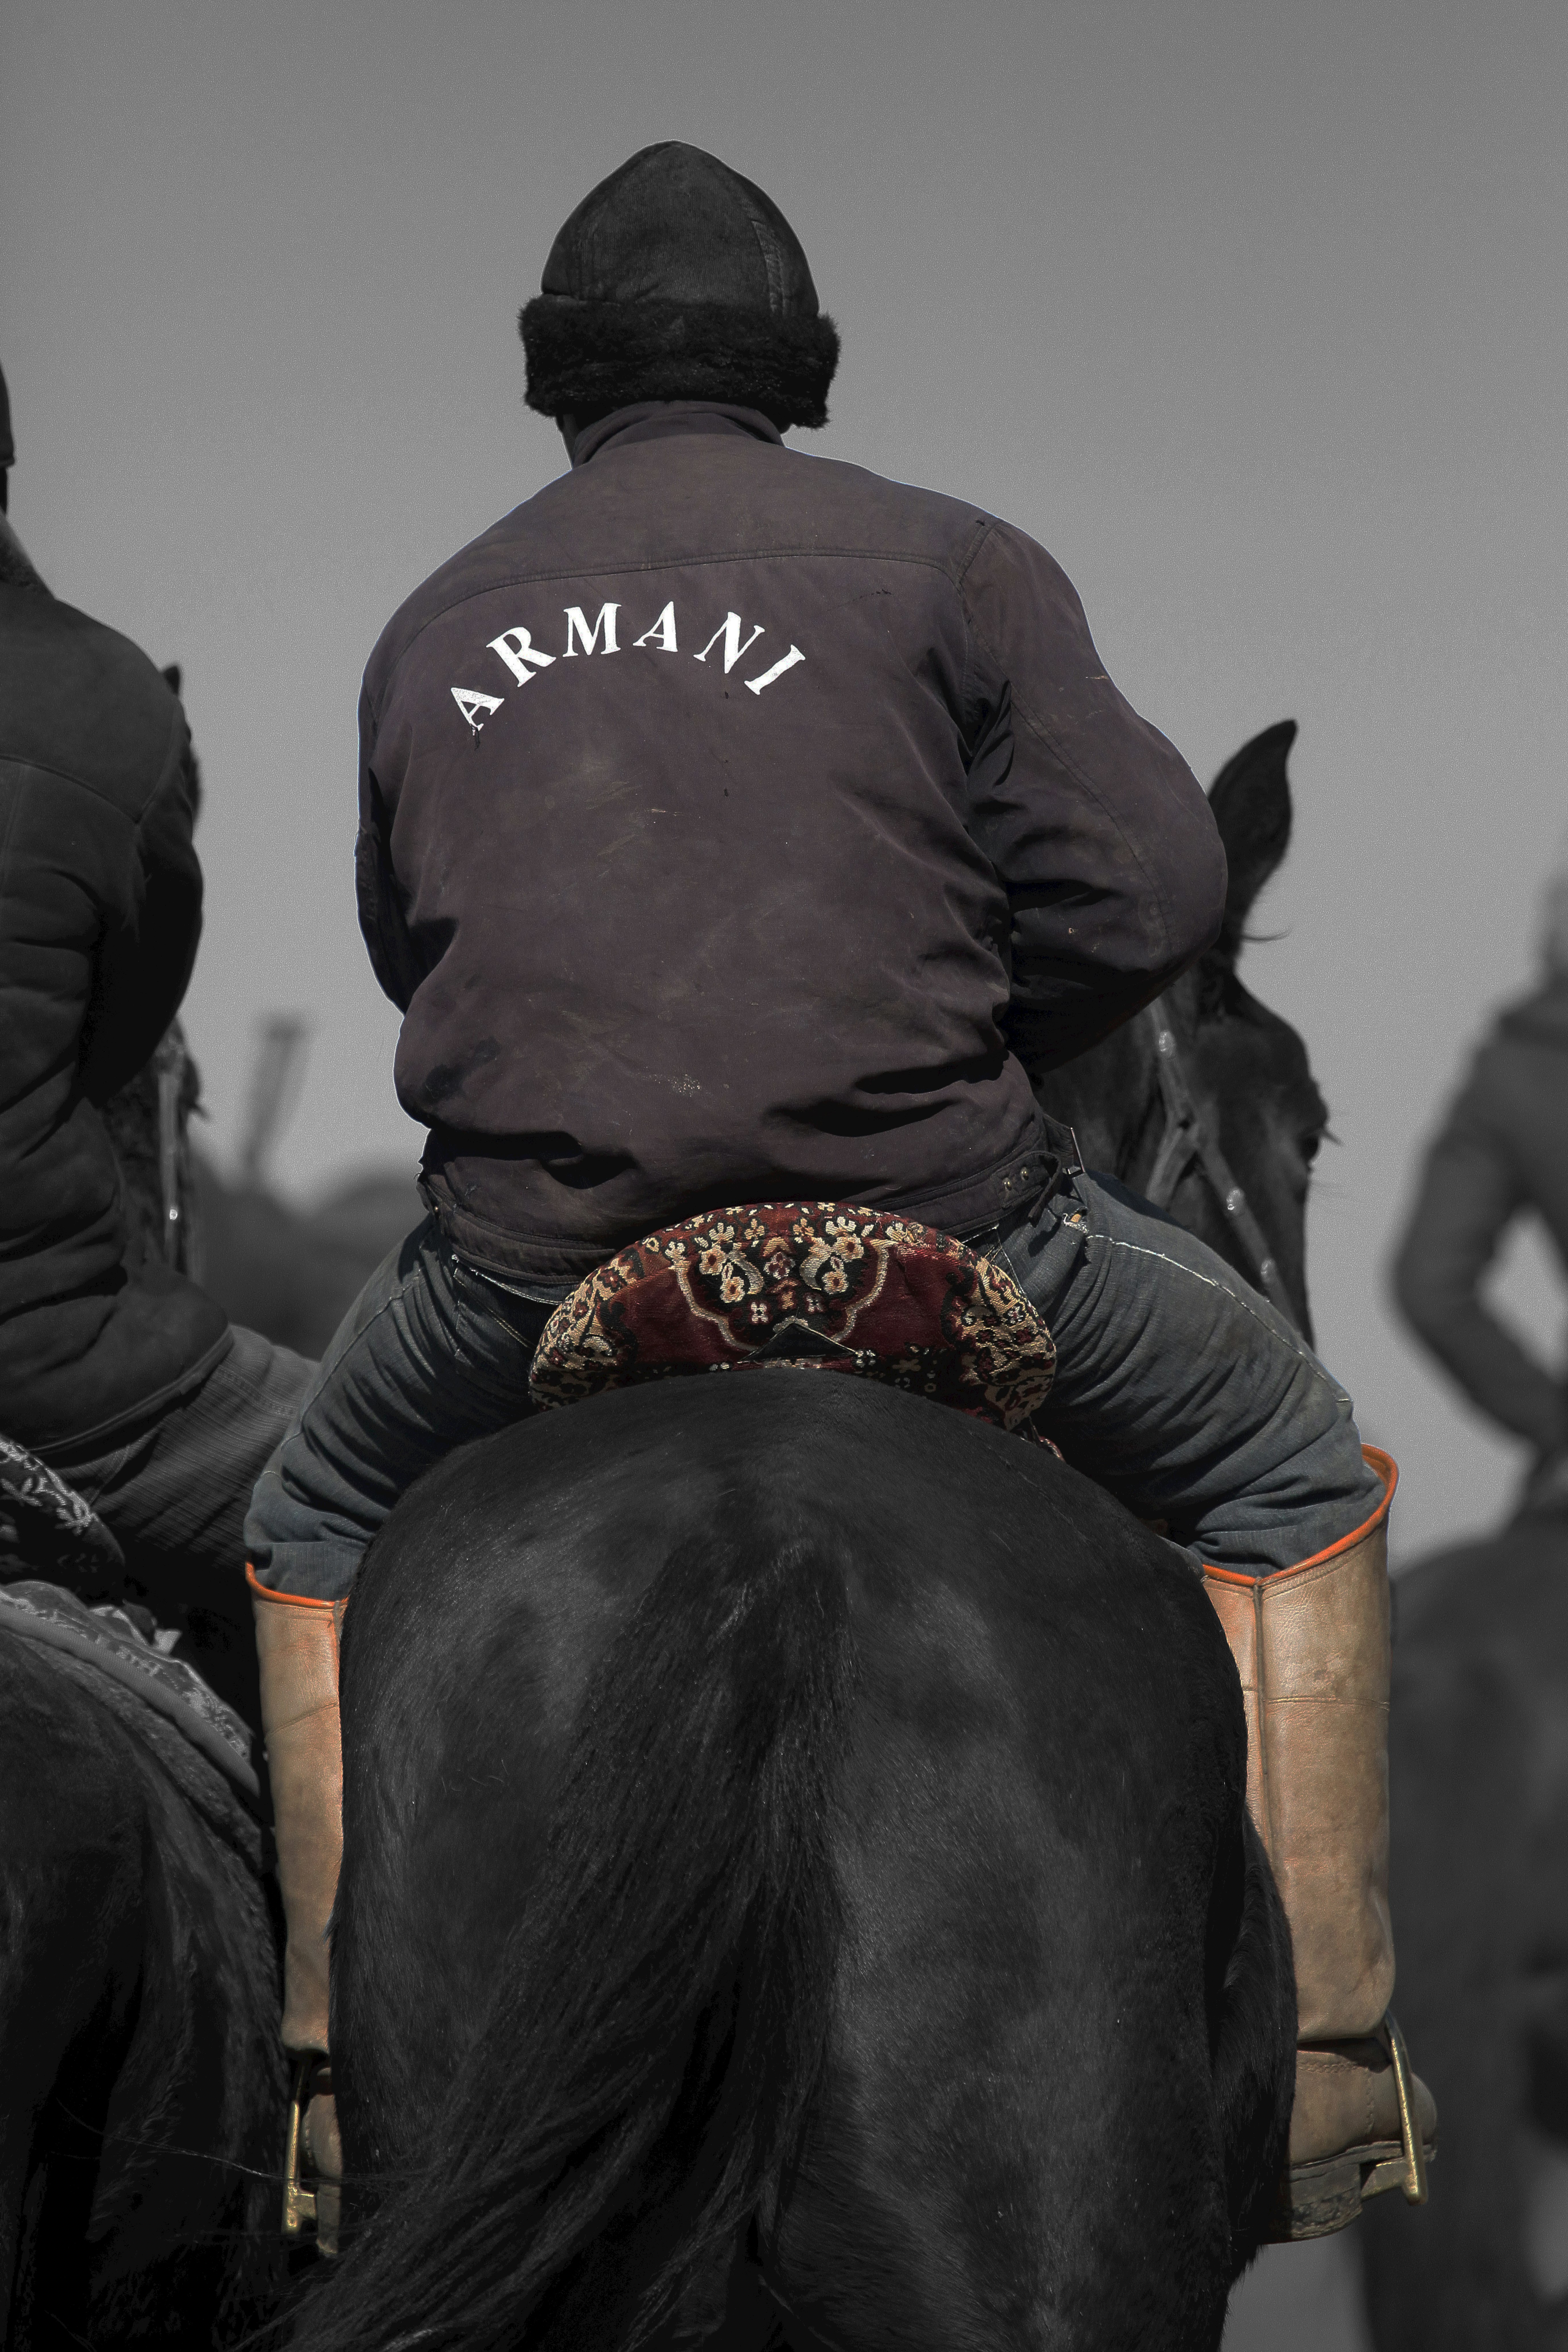 An adult on a black horse facing away from camera. Their jacket says 'Armani'.